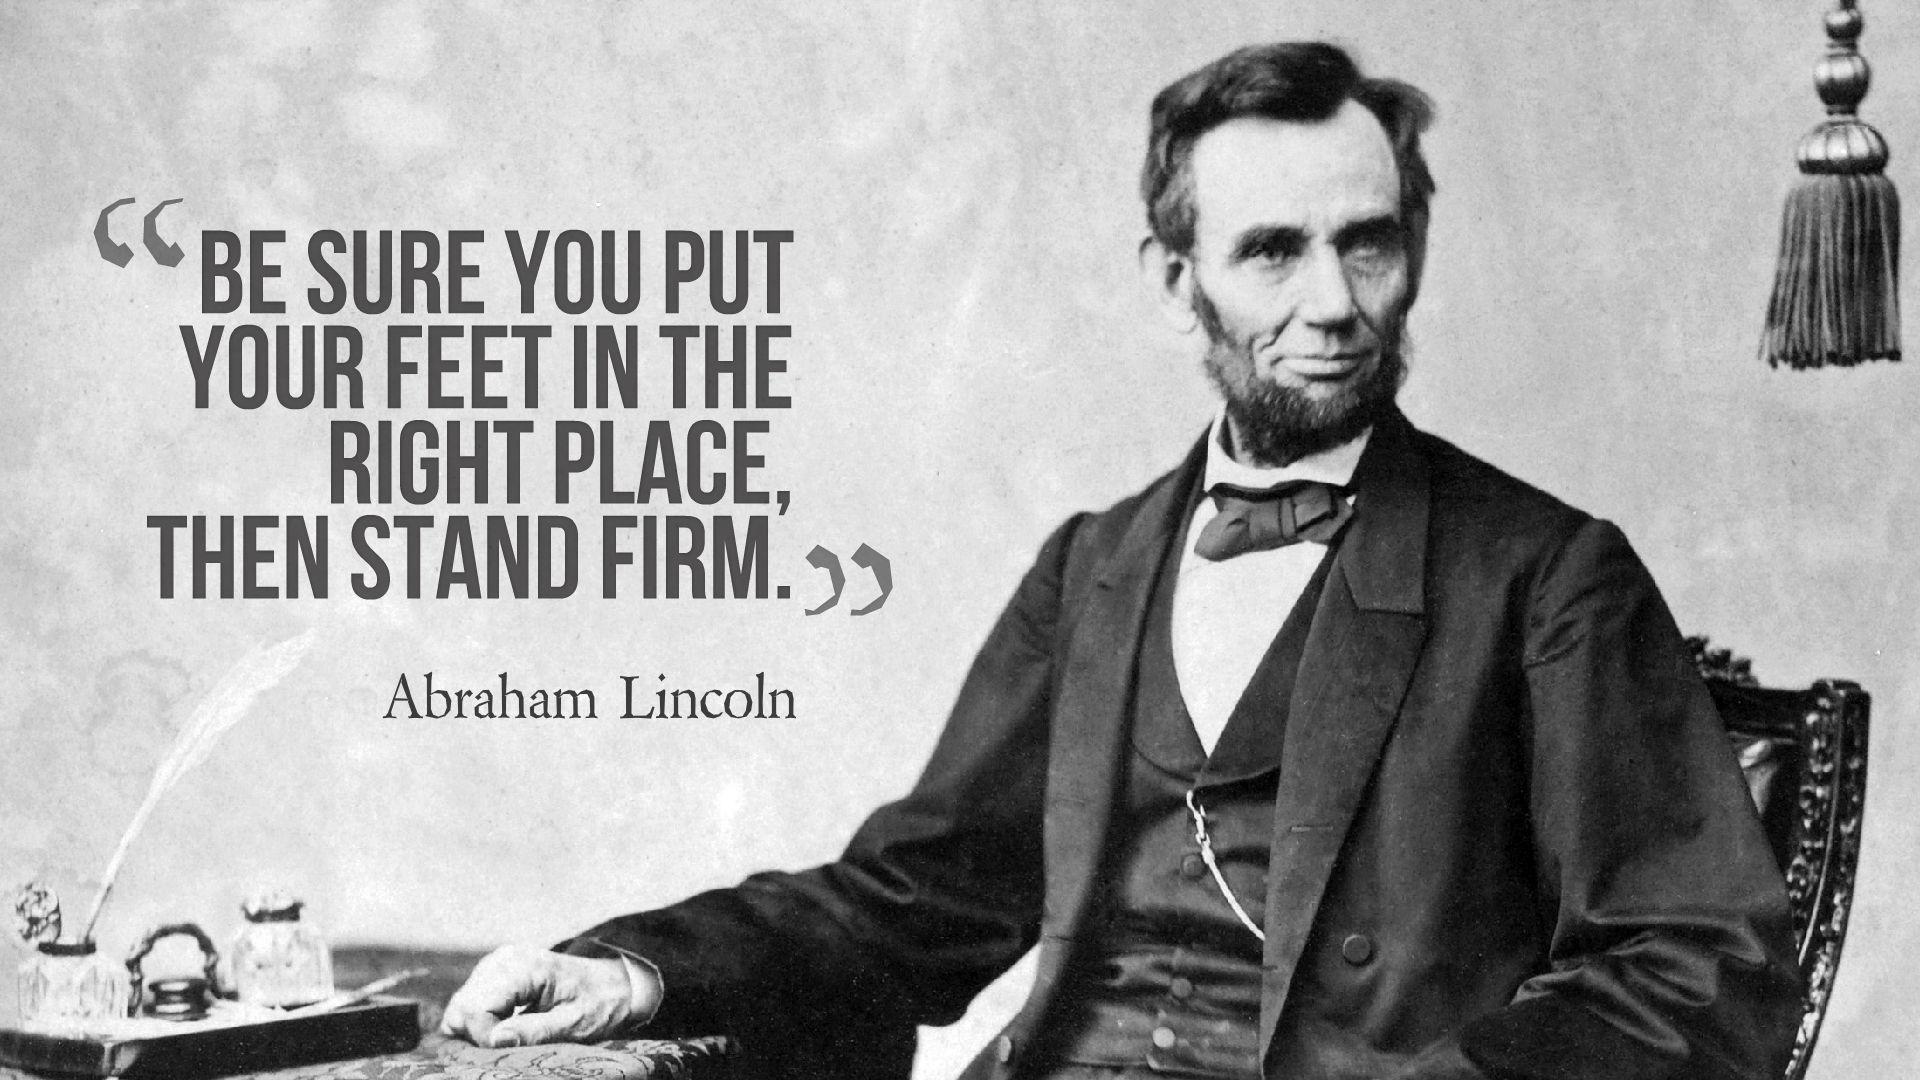 Download Abraham Lincoln Quotes Background Wallpaper 13771 Baltana